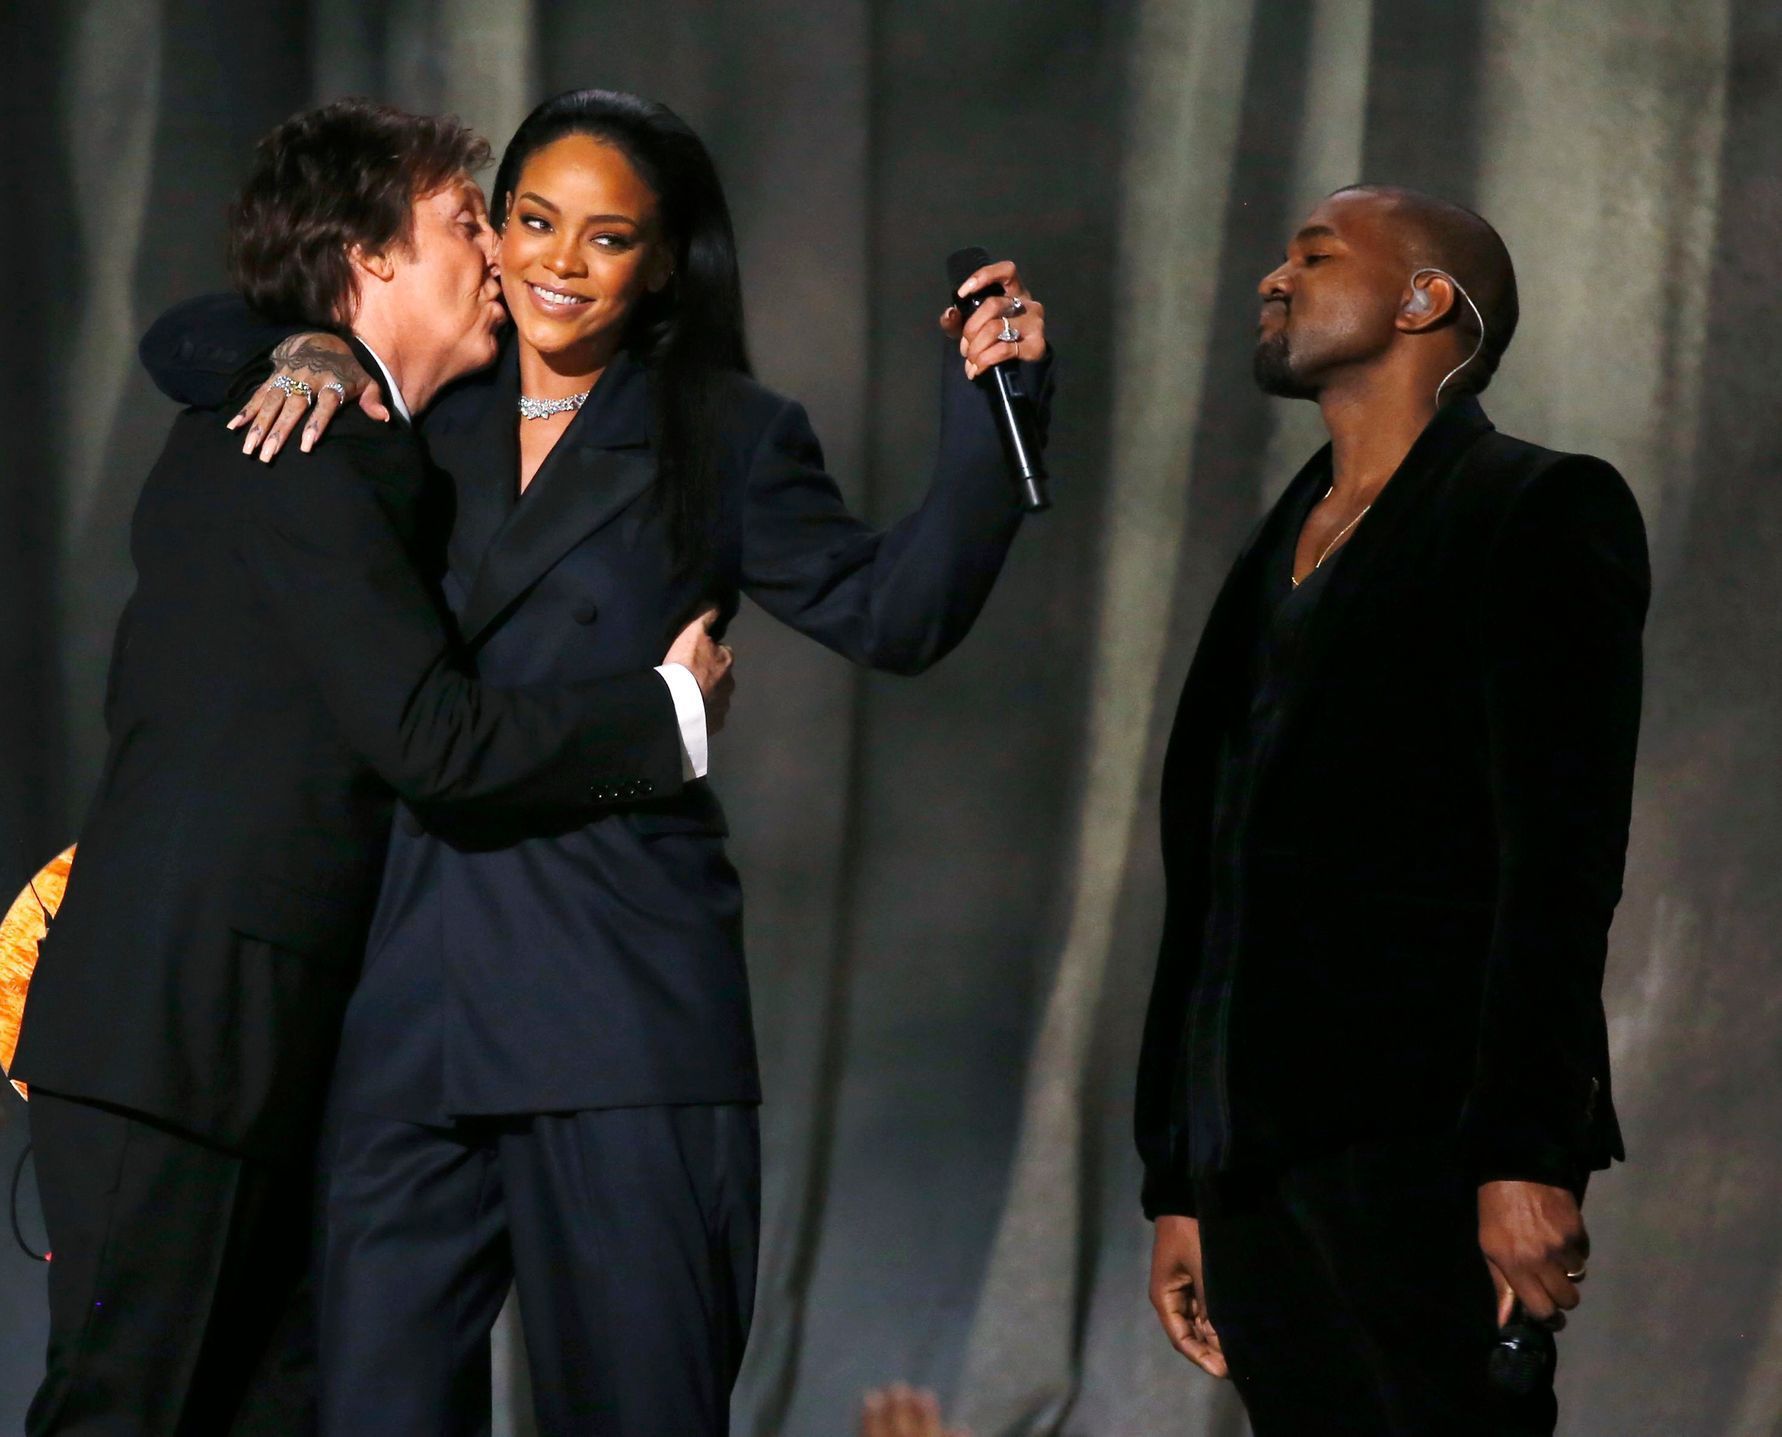 Paul McCartney kisses Rihanna as Kanye West watches after performing &quot;FourFiveSeconds&quot; at the 57th annual Grammy Awards in Los Angeles